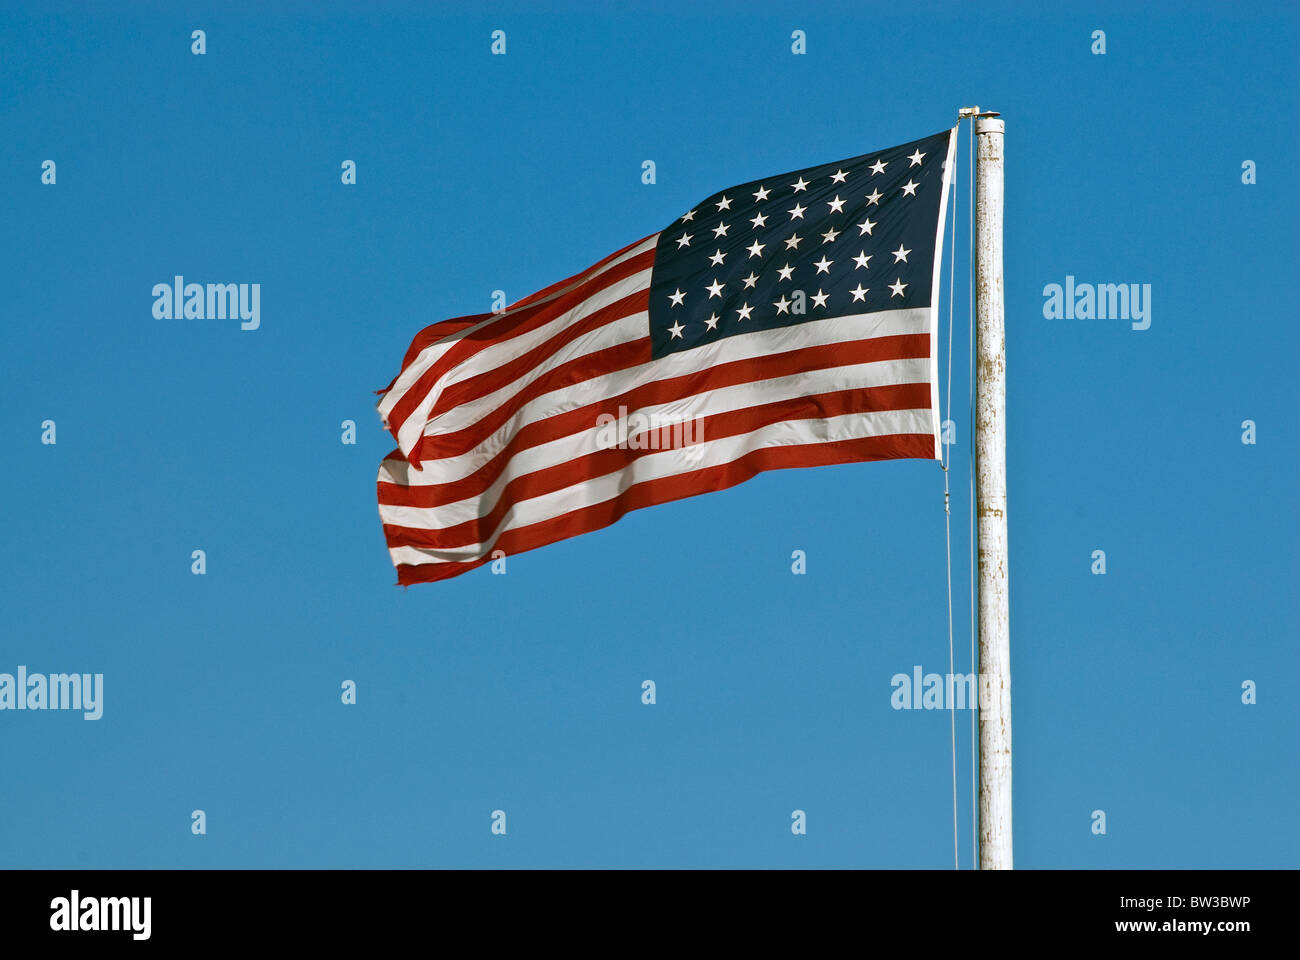 US flag with 33 stars from period 1859-1861 flying over Fort Lancaster State Historic Site, Texas, USA Stock Photo